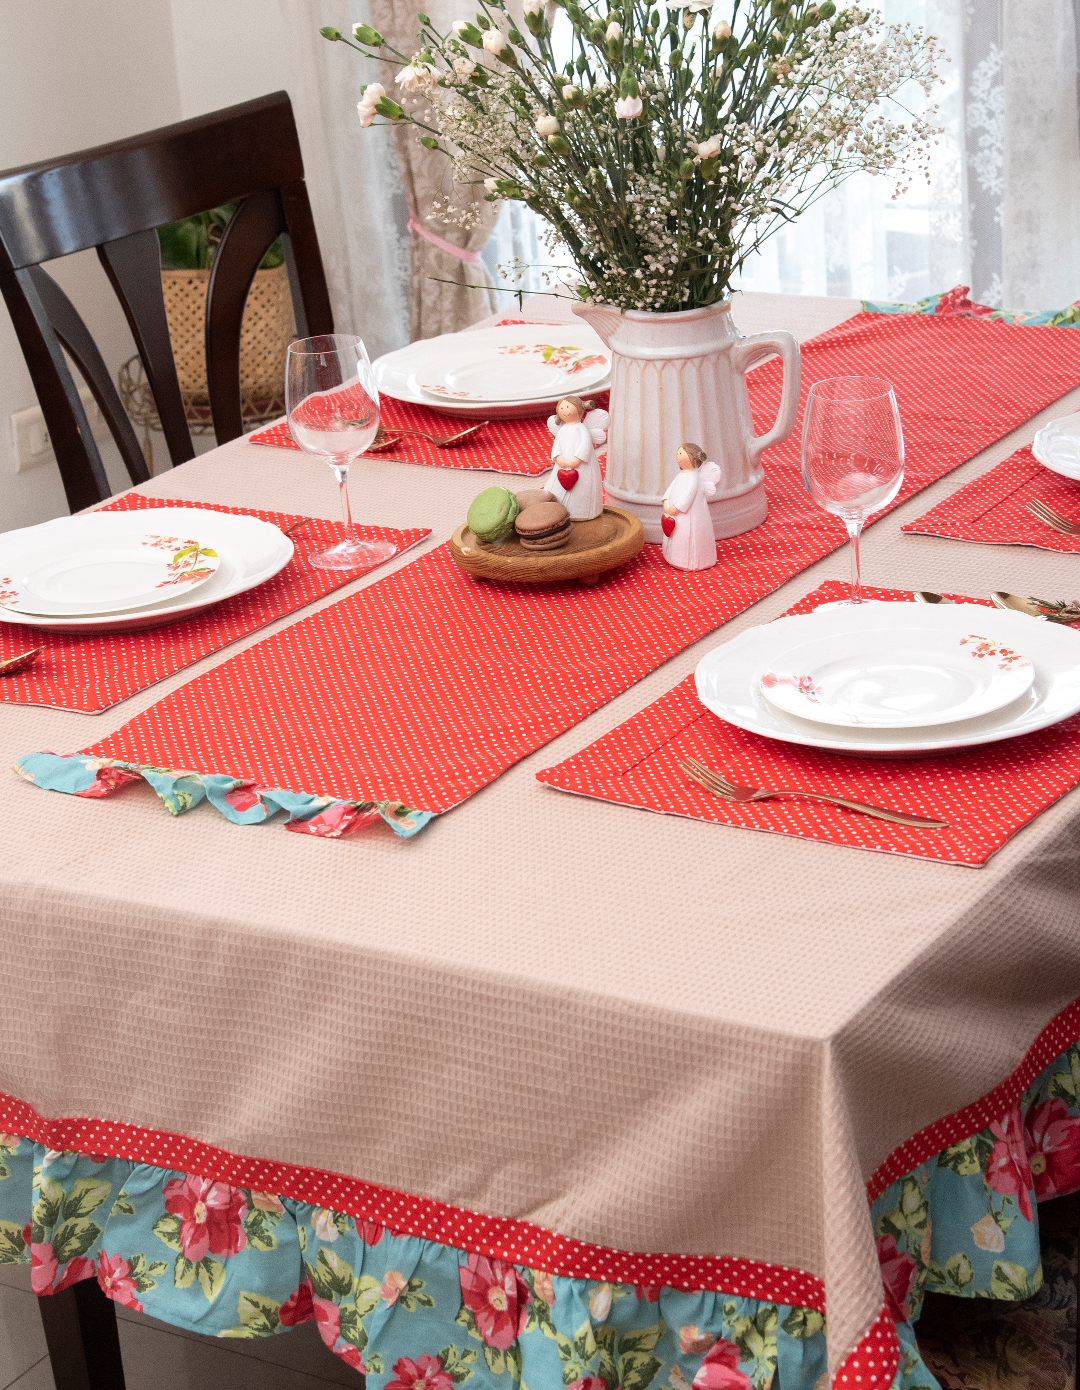 Table Runner - Polka with floral frills (Size: 12.5